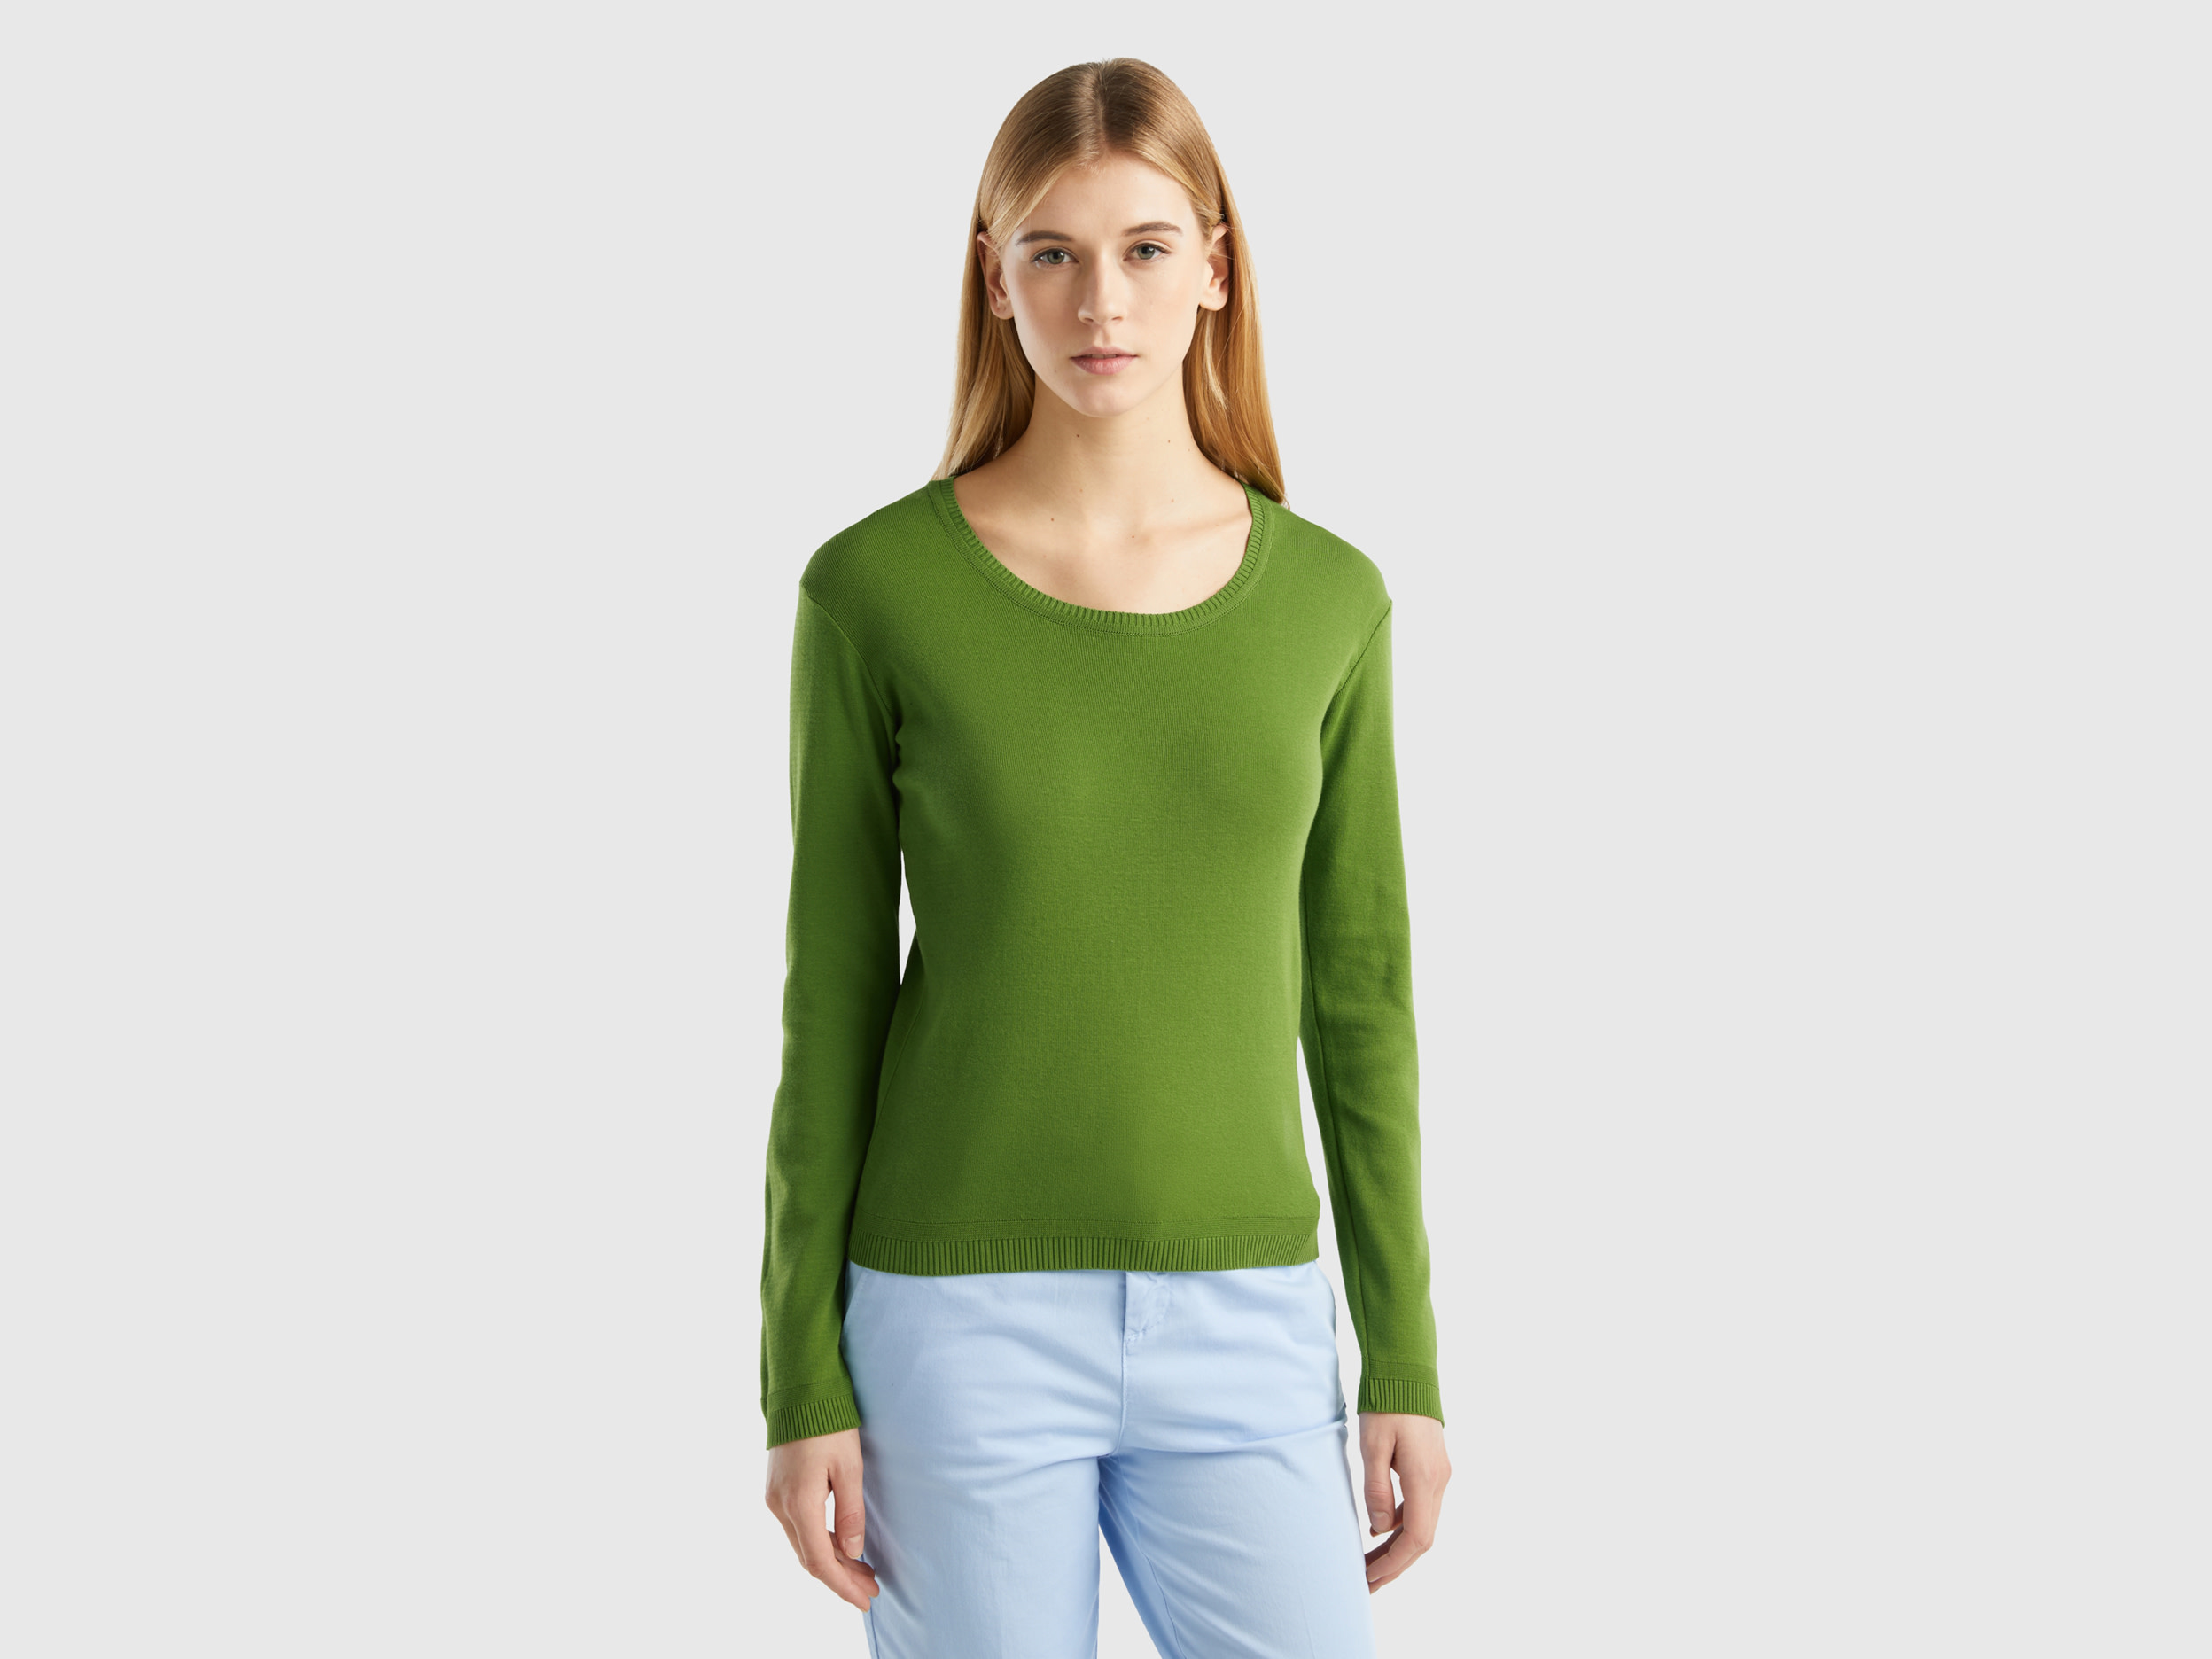 Benetton, Crew Neck Sweater In Pure Cotton, size L, Military Green, Women